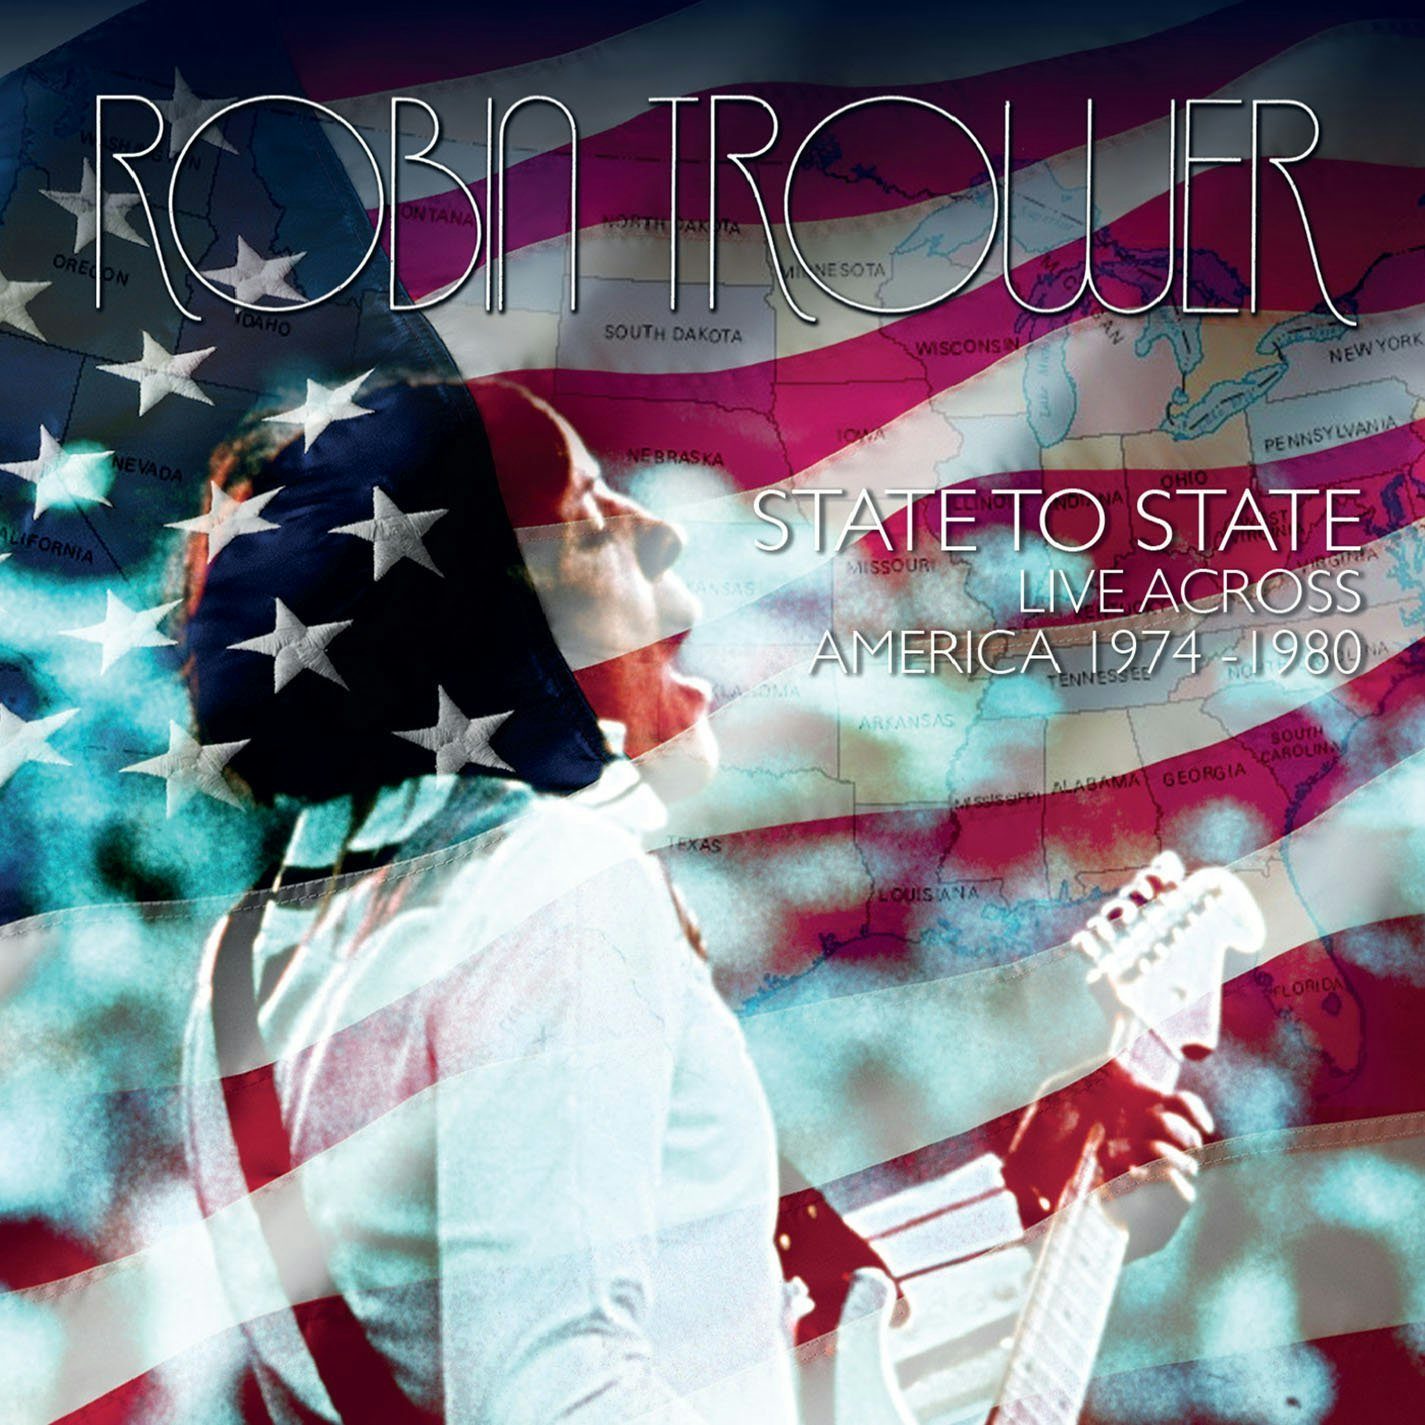 free download robin trower united state of mind